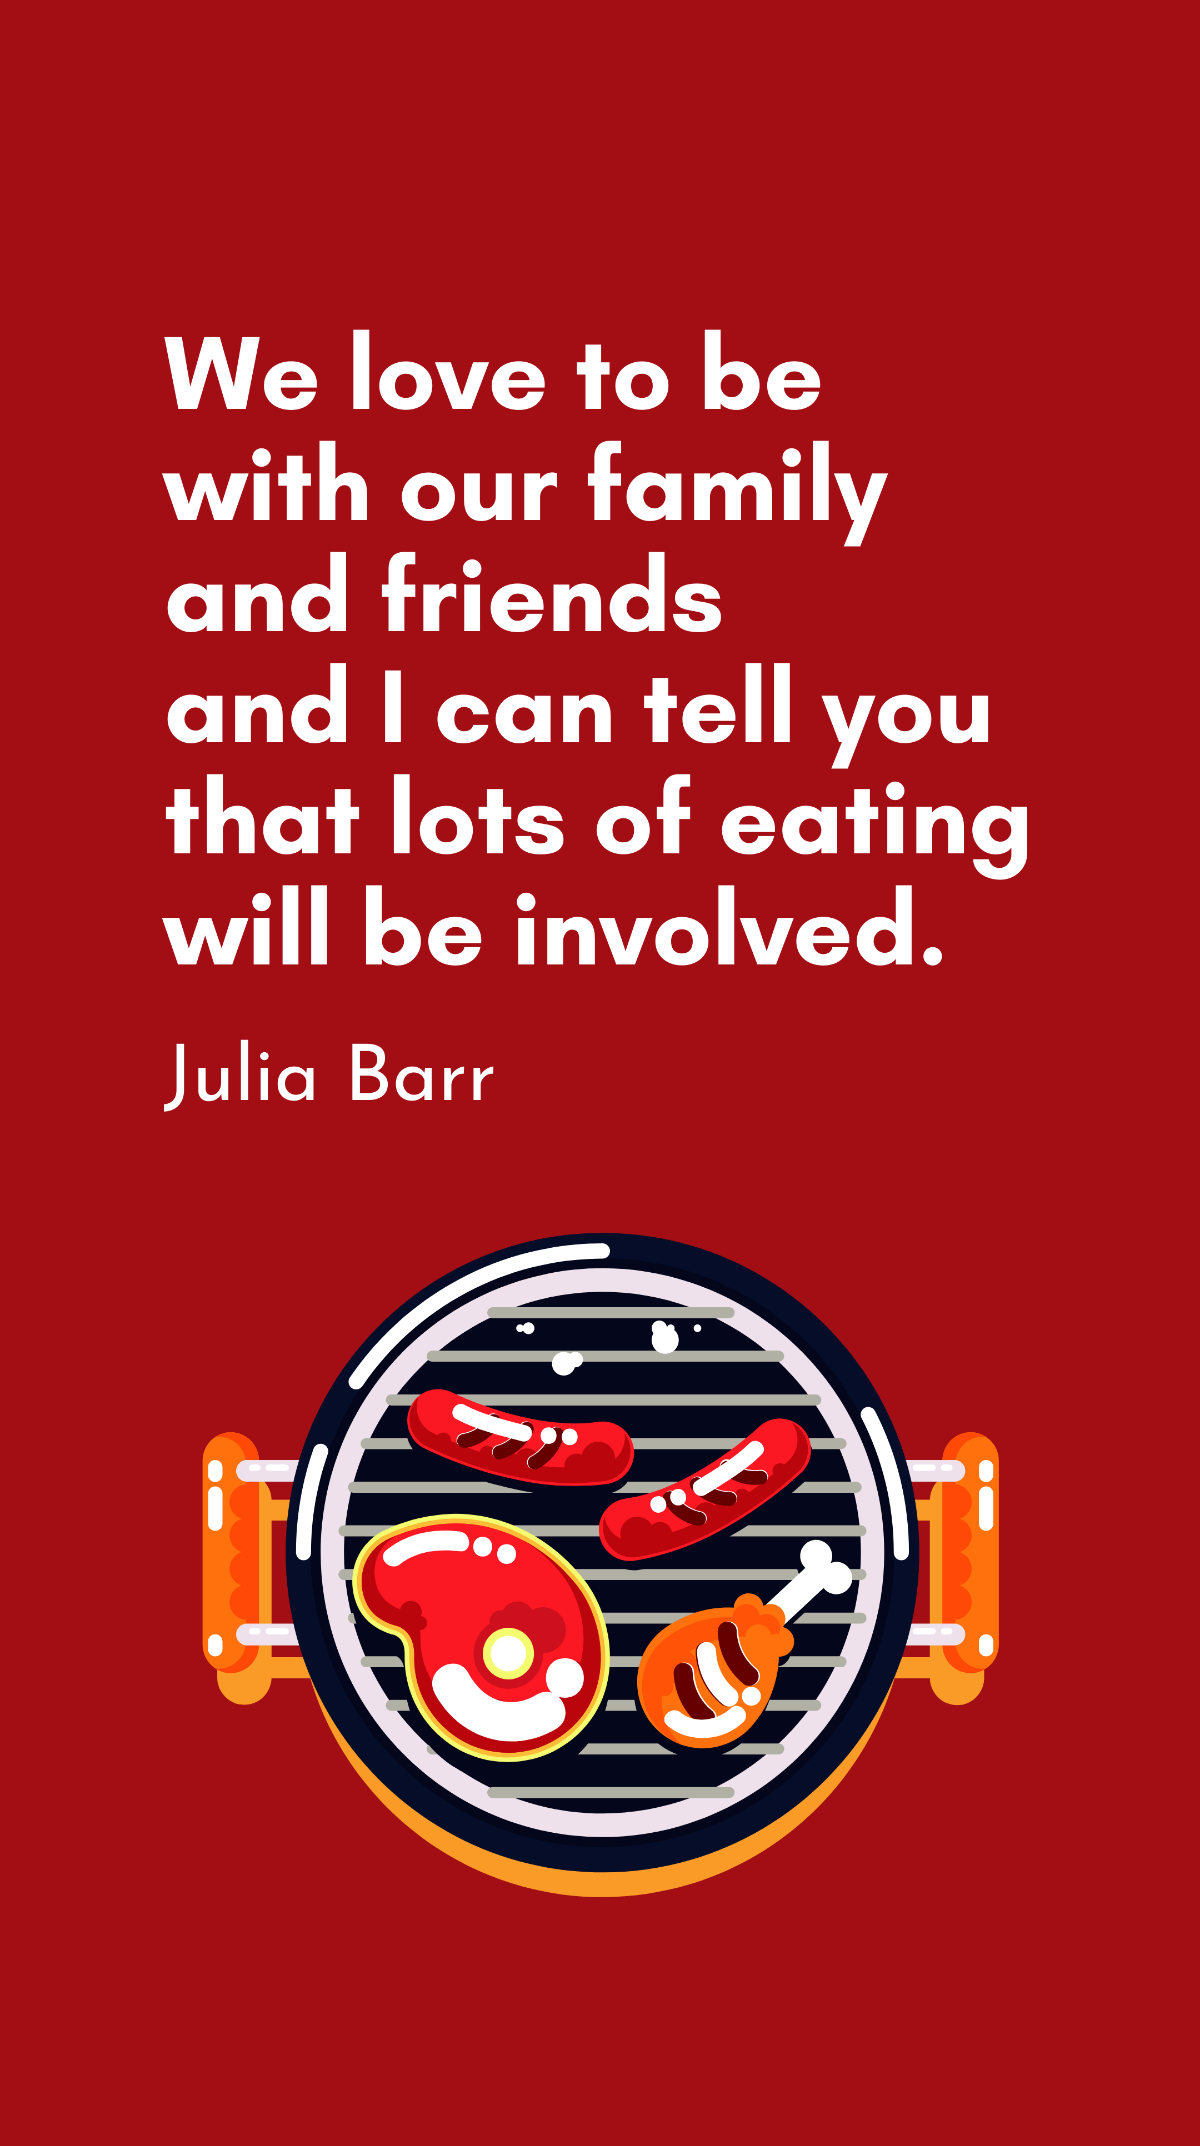 Julia Barr - We love to be with our family and friends and I can tell you that lots of eating will be involved. Template